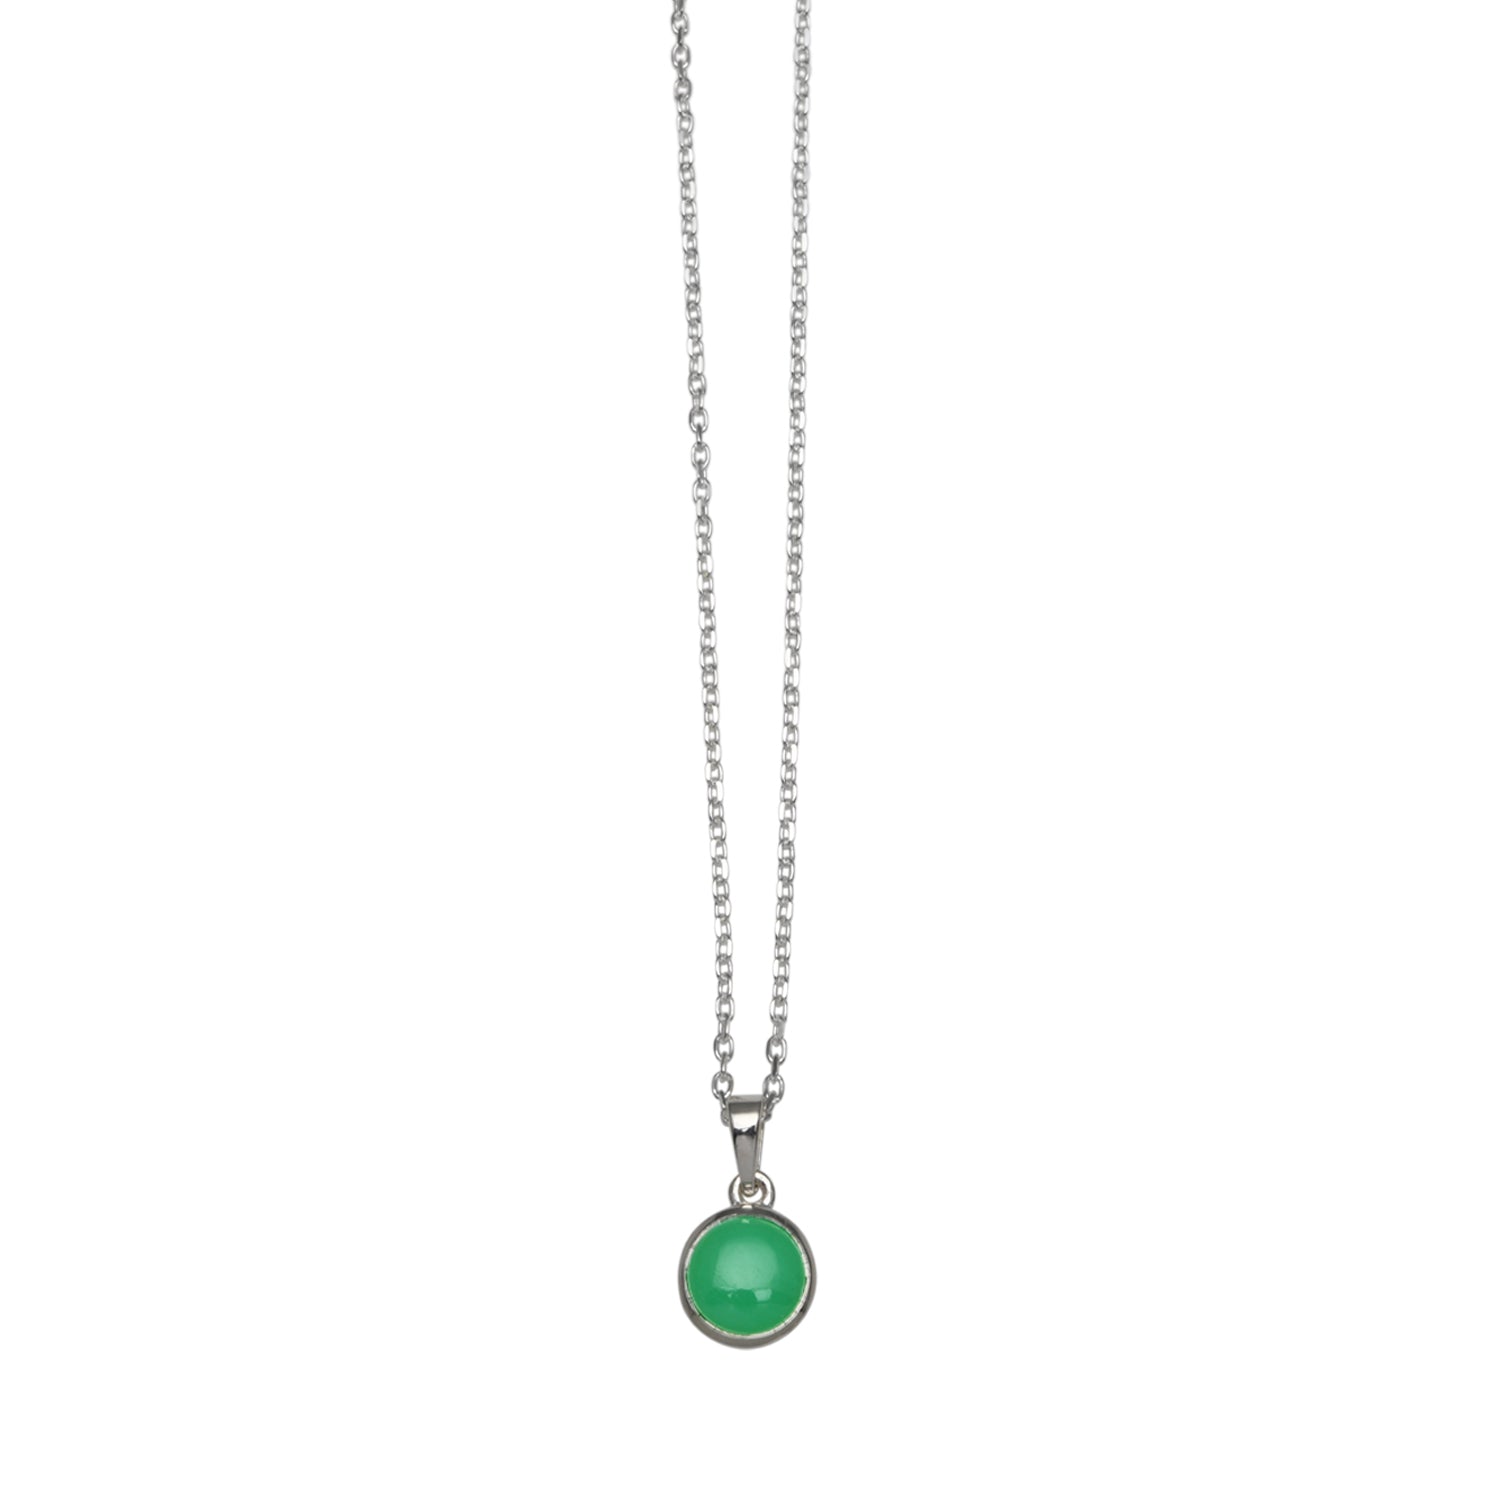 Sterling Silver Adjustable Belcher Chain Necklace With 8mm Round Chrysoprase Pendant